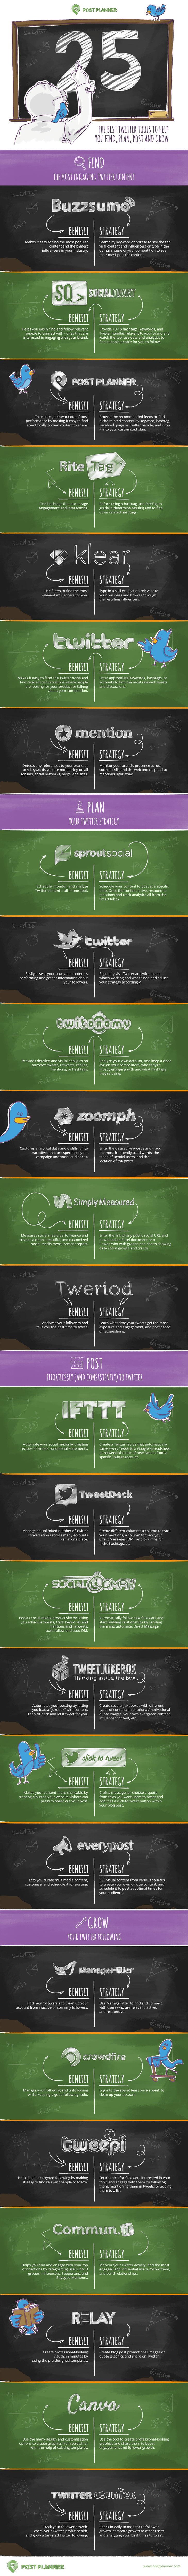 25 Twitter Tools Infographic